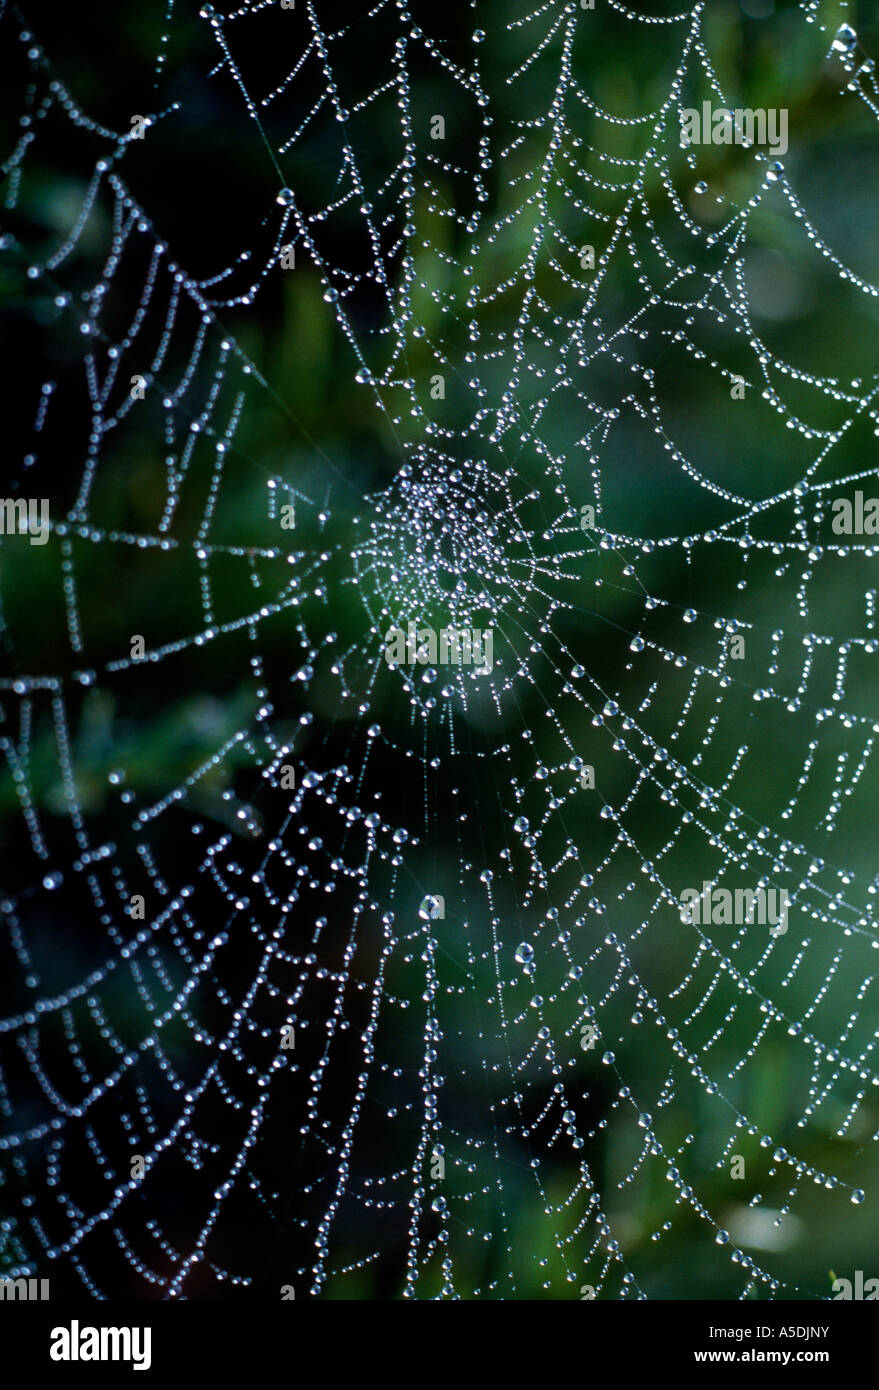 Spiders Web With Water Droplets Stock Photo